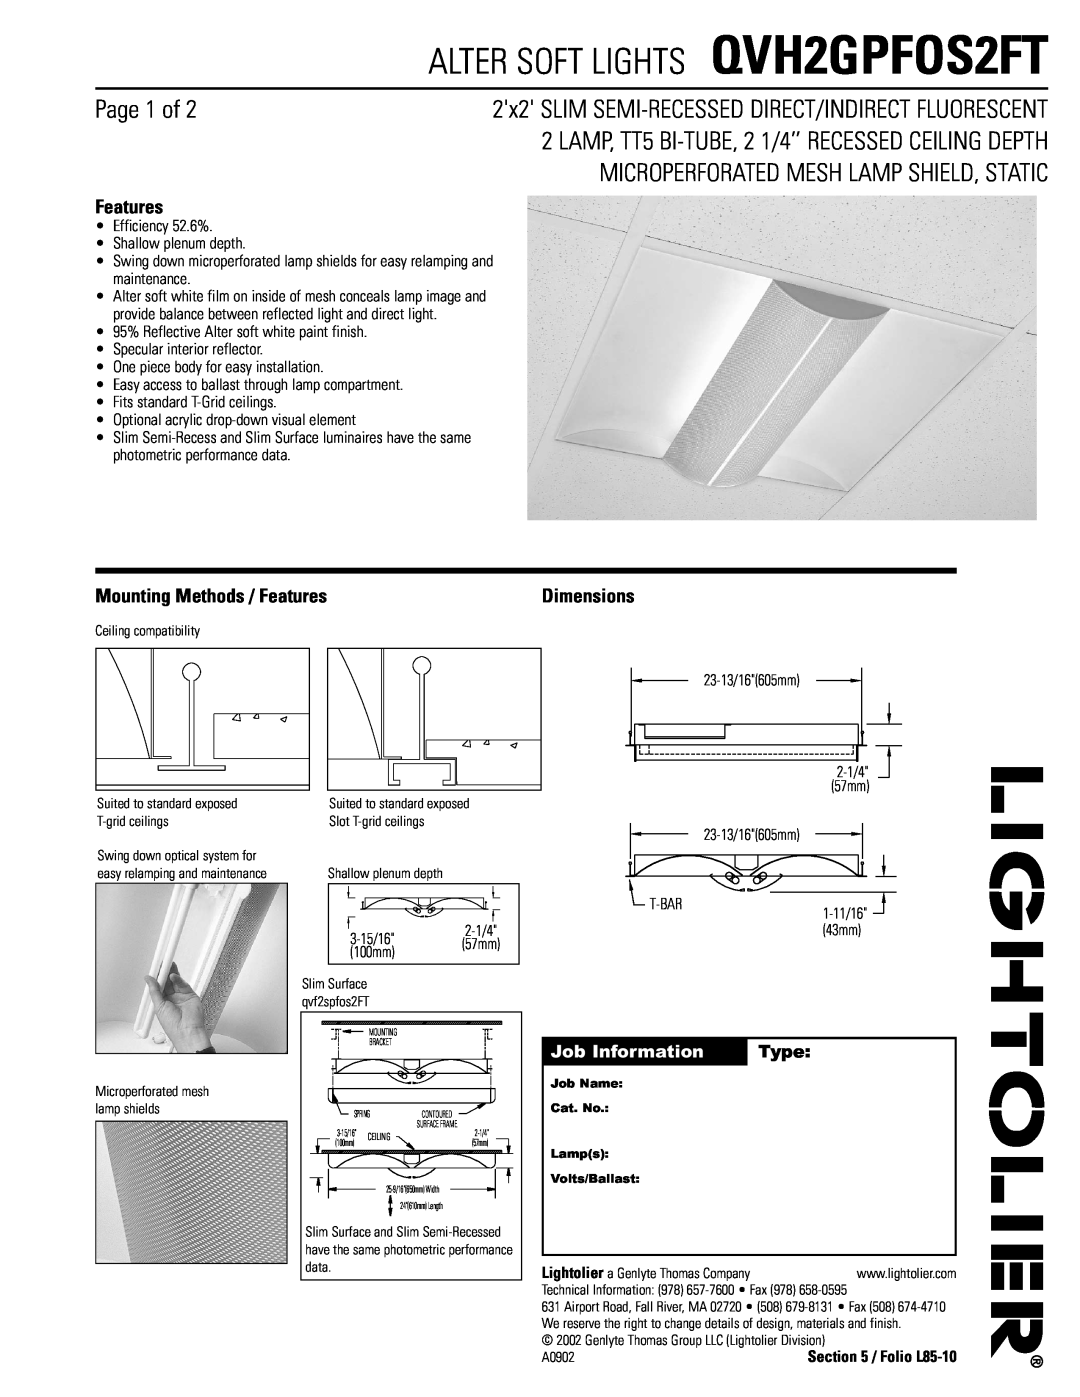 Lightolier dimensions ALTER SOFT LIGHTS QVH2GPFOS2FT, Page 1 of, Microperforated Mesh Lamp Shield, Static, Features 